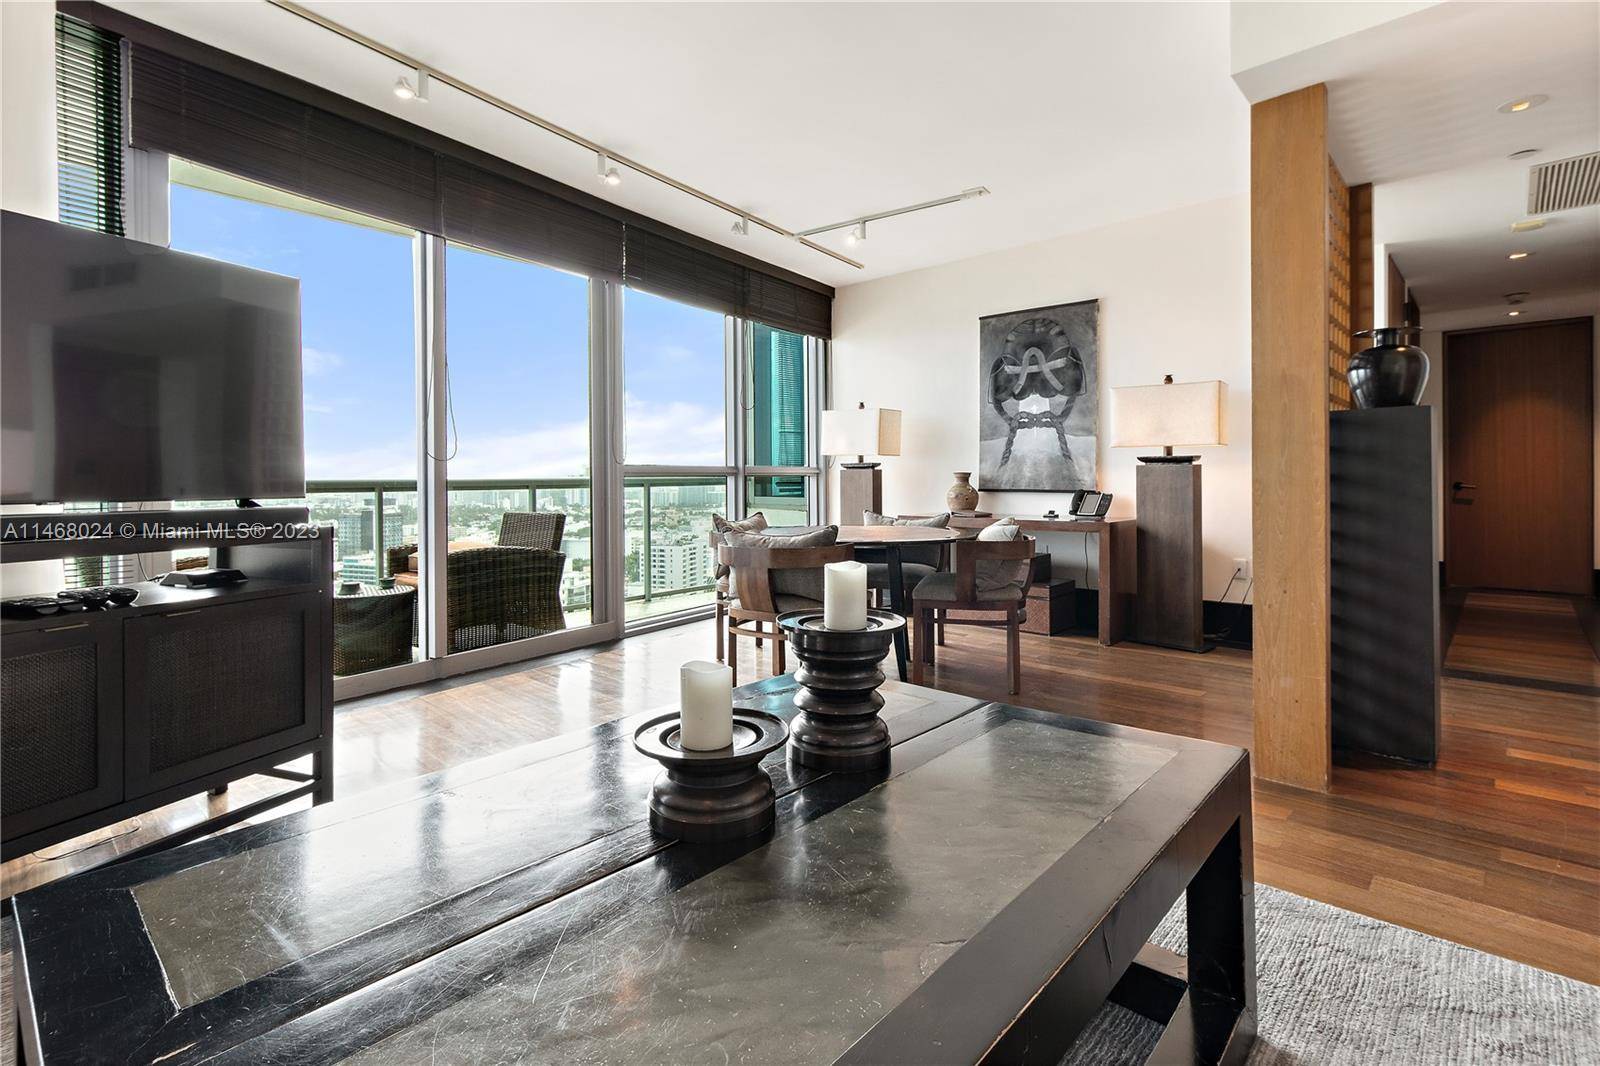 Spectacular apartment located in one of the most coveted areas of South Beach, located in one of the best buildings full of luxury and attention, fully furnished.